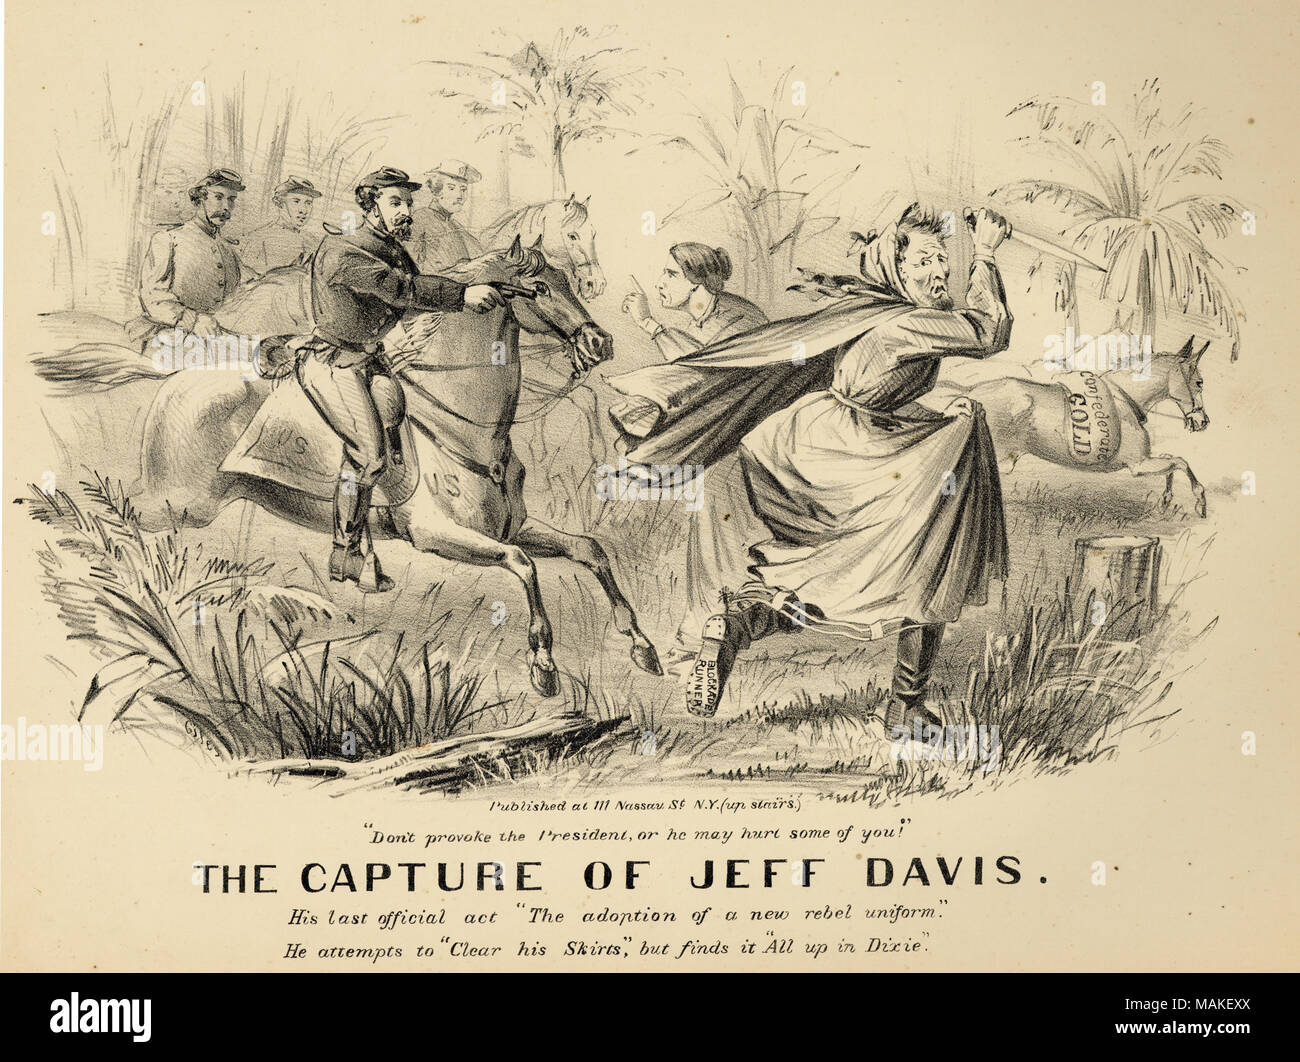 Cartoon print of Jefferson Davis in a dress running from Union cavalrymen. Mrs. Davis is in the background raising a finger toward the cavalrymen and there is also a horse with a sack that reads 'Confederate GOLD' running away in the background. 'Don't provoke the President, or he may hurt some of you!' 'THE CAPTURE OF JEFF DAVIS. His last official act,' 'The adoption of a new rebel uniform.' and 'He attempts to Clear his Skirts, but finds it All up in Dixie.' (printed below image). Title: 'The Capture of Jeff Davis.'  . circa 1865. Giles Stock Photo